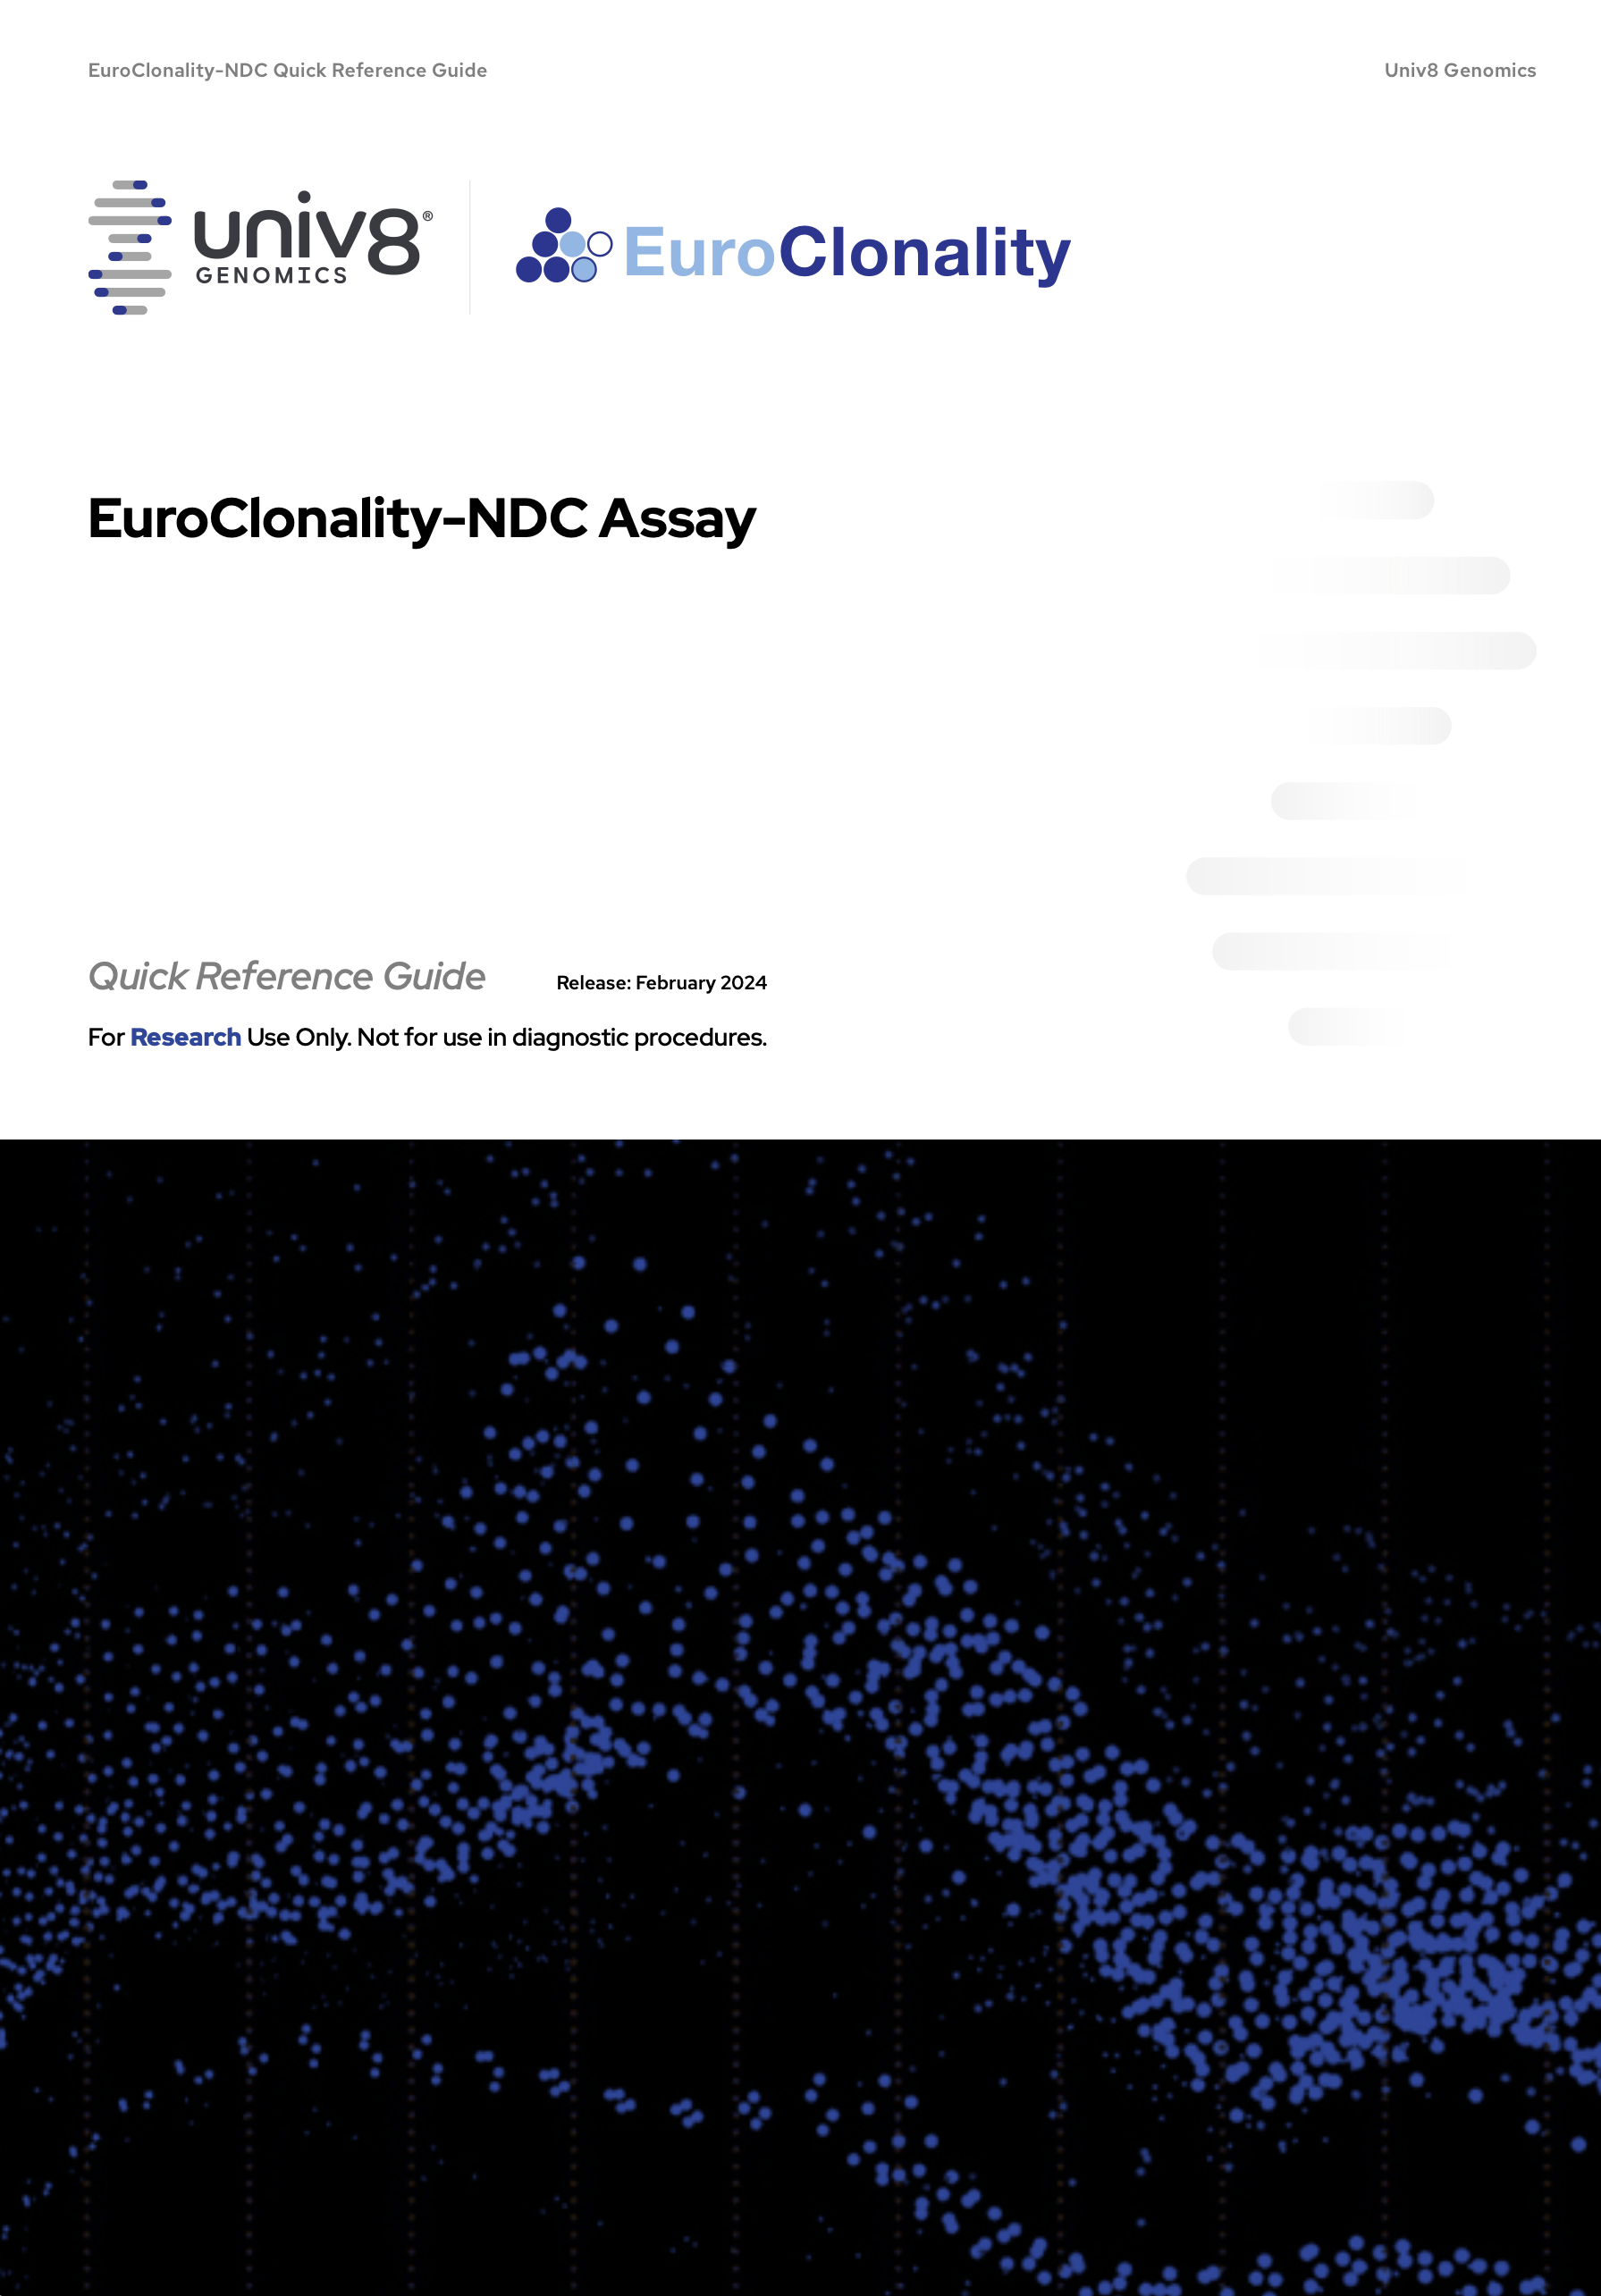 Cover of EuroClonality-NDC QRG